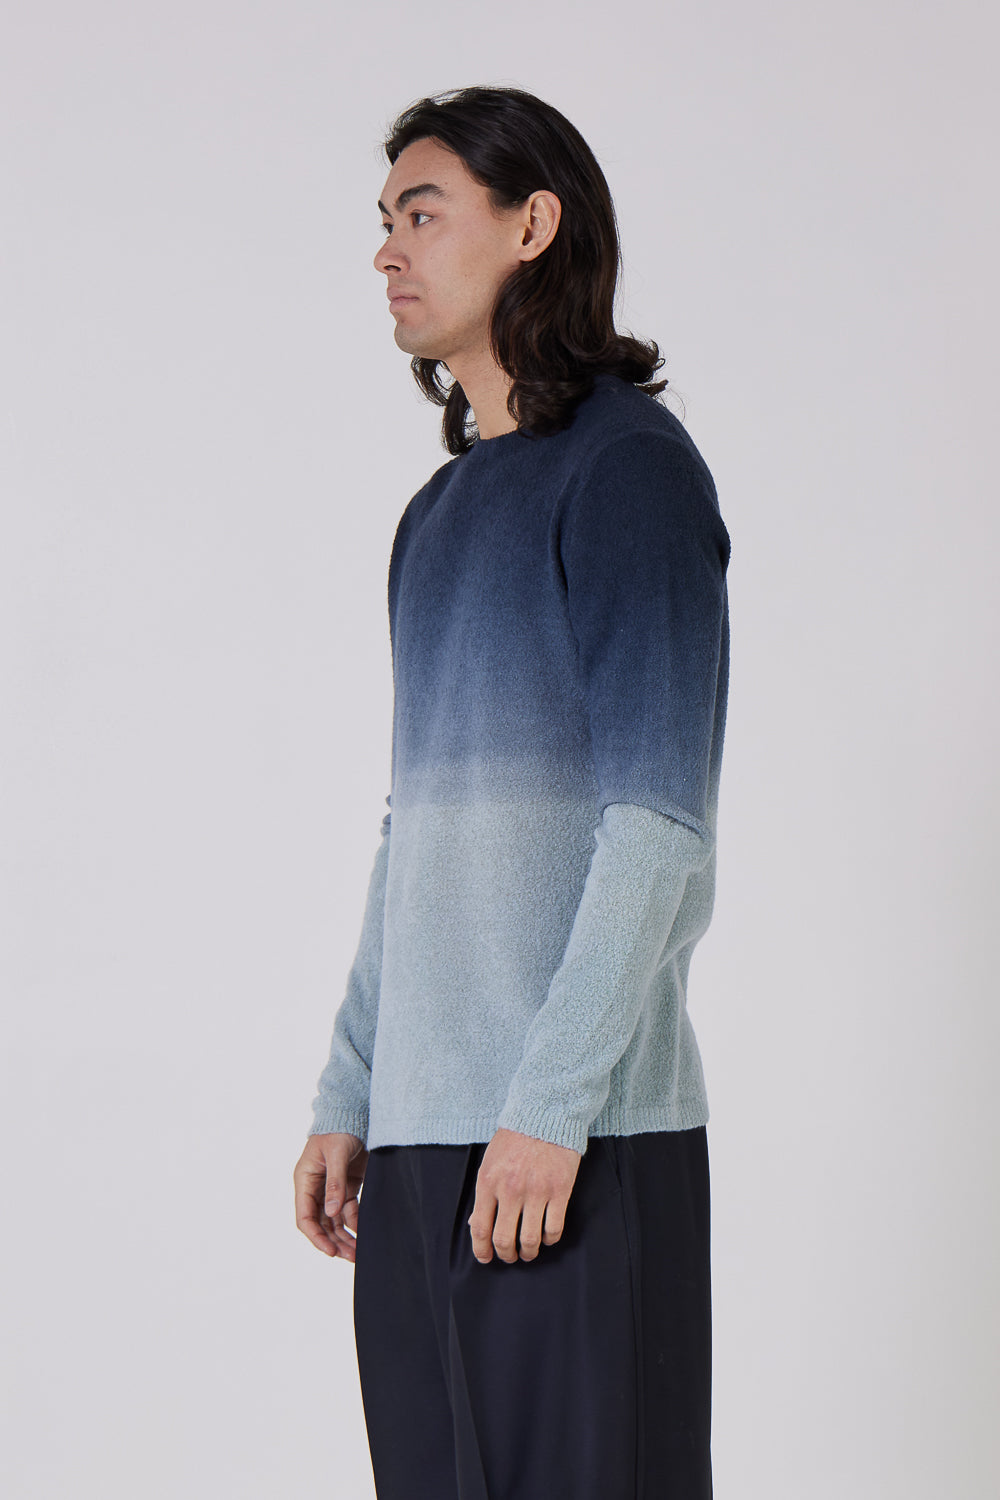 Buy the Daniele Fiesoli Boiled Wool Faded Effect Sweatshirt in Blue at Intro. Spend £50 for free UK delivery. Official stockists. We ship worldwide.